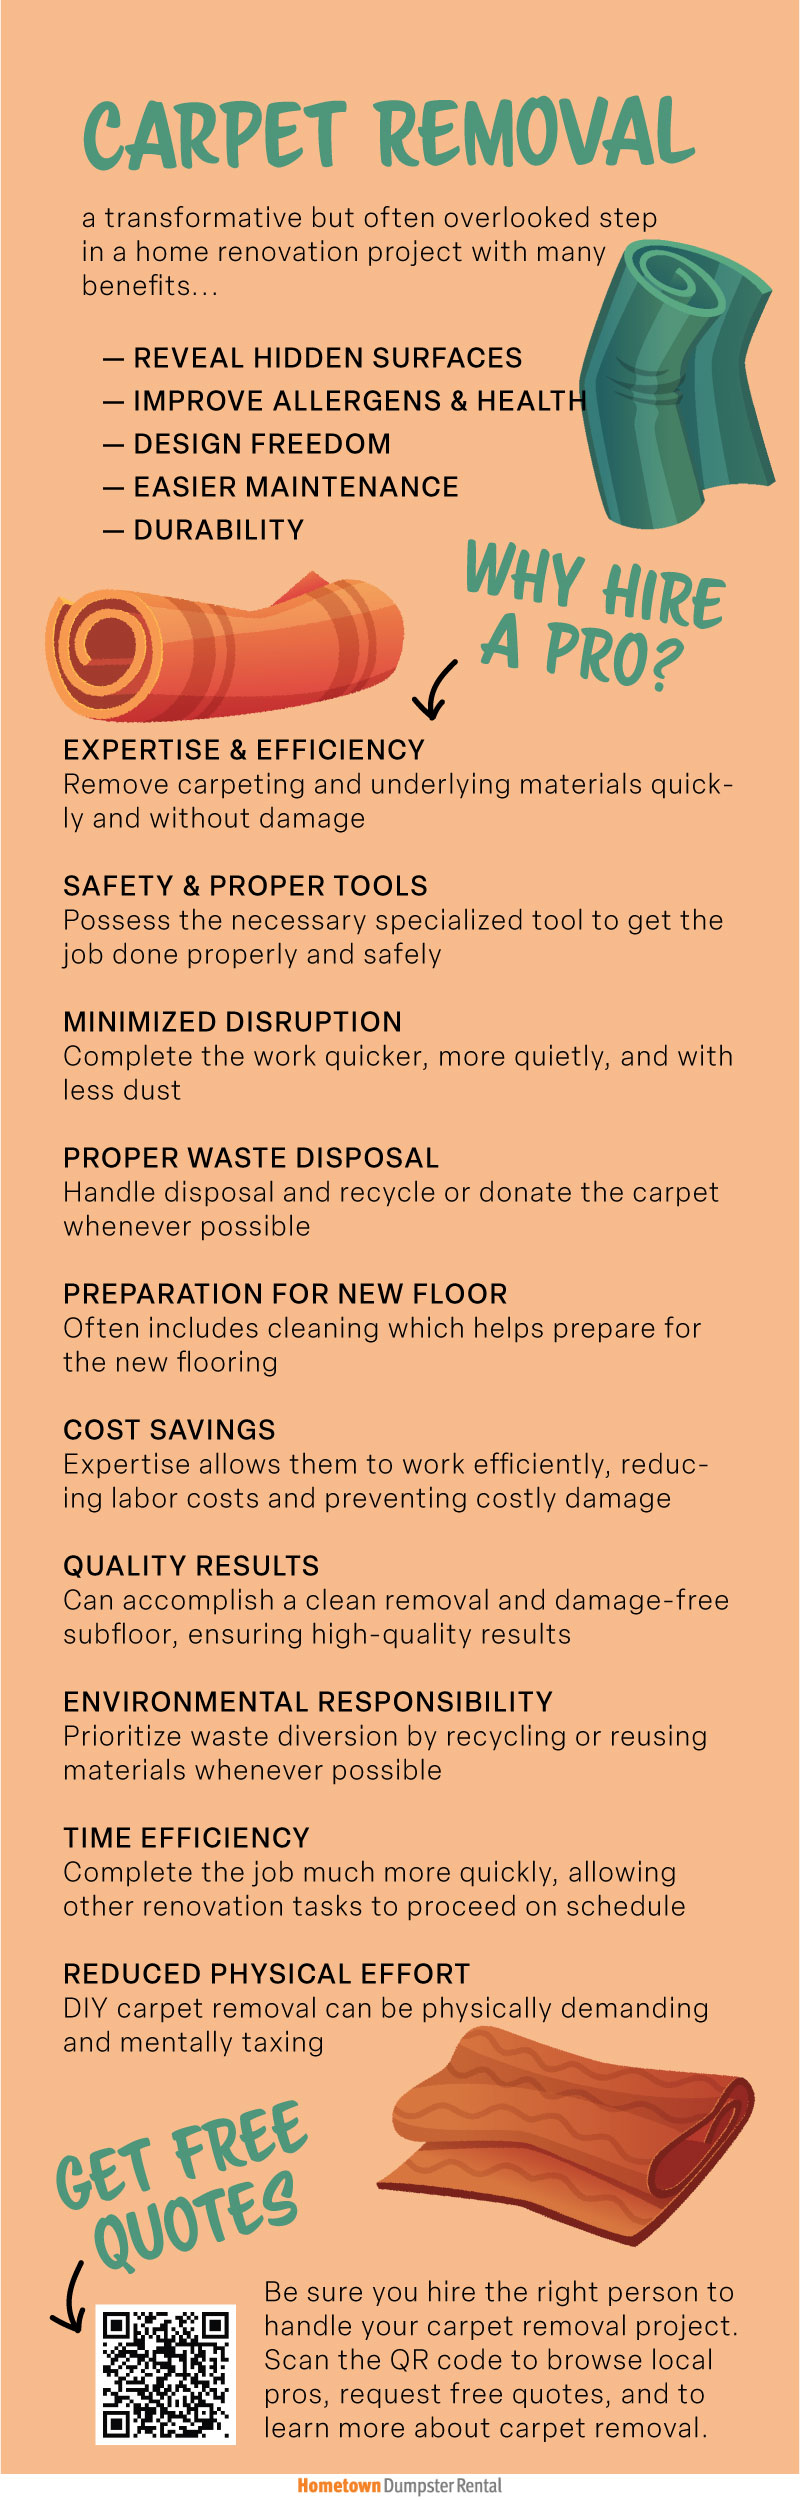 carpet removal for home renovations infographic